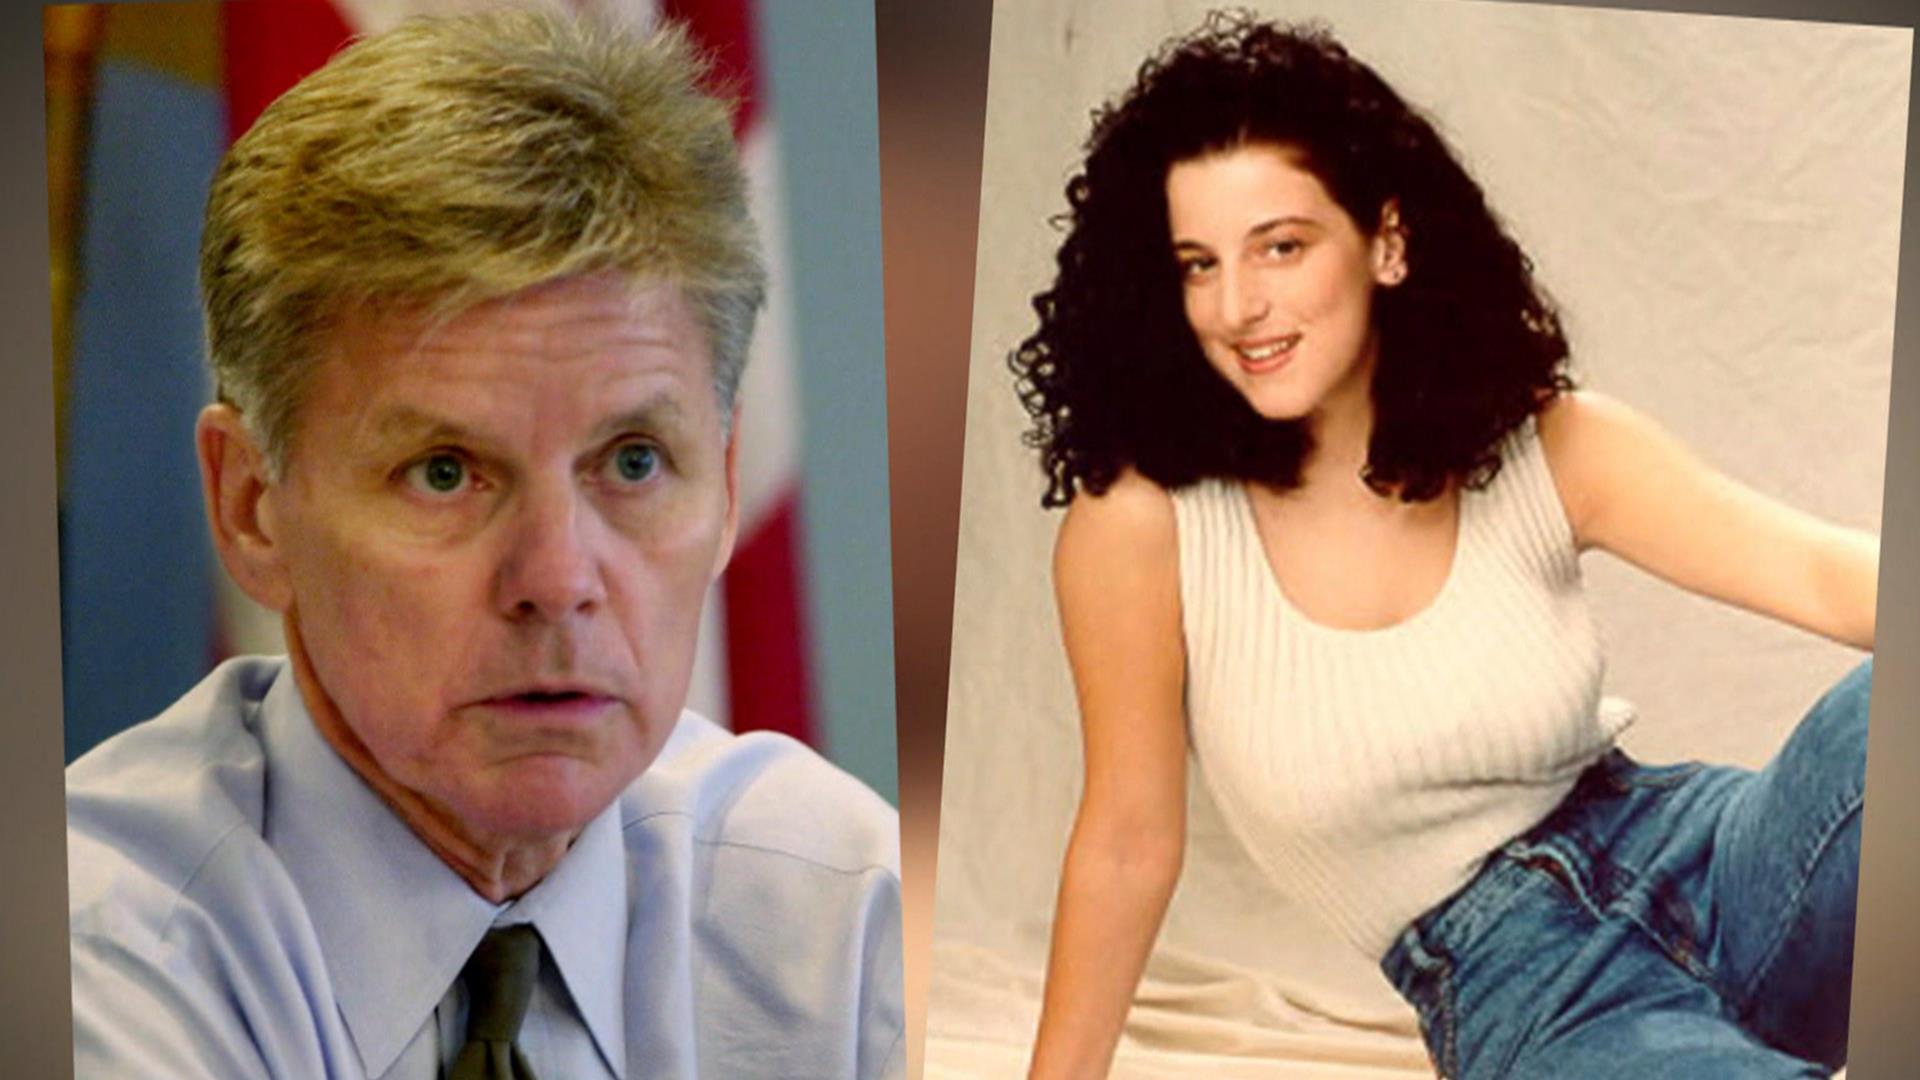 Gary Condit reveals what he said to Chandra Levy's parents during private meeting